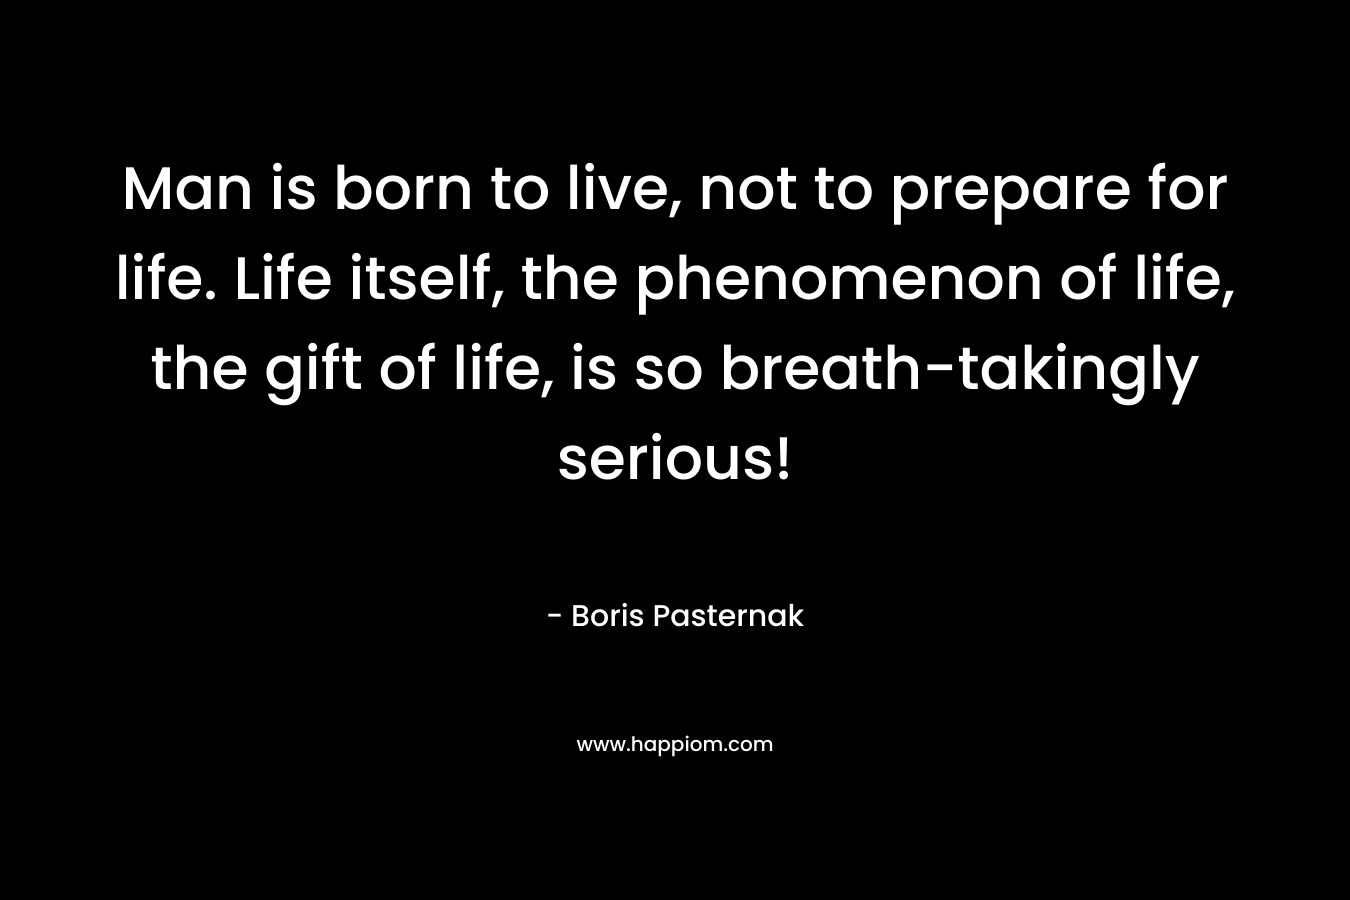 Man is born to live, not to prepare for life. Life itself, the phenomenon of life, the gift of life, is so breath-takingly serious!